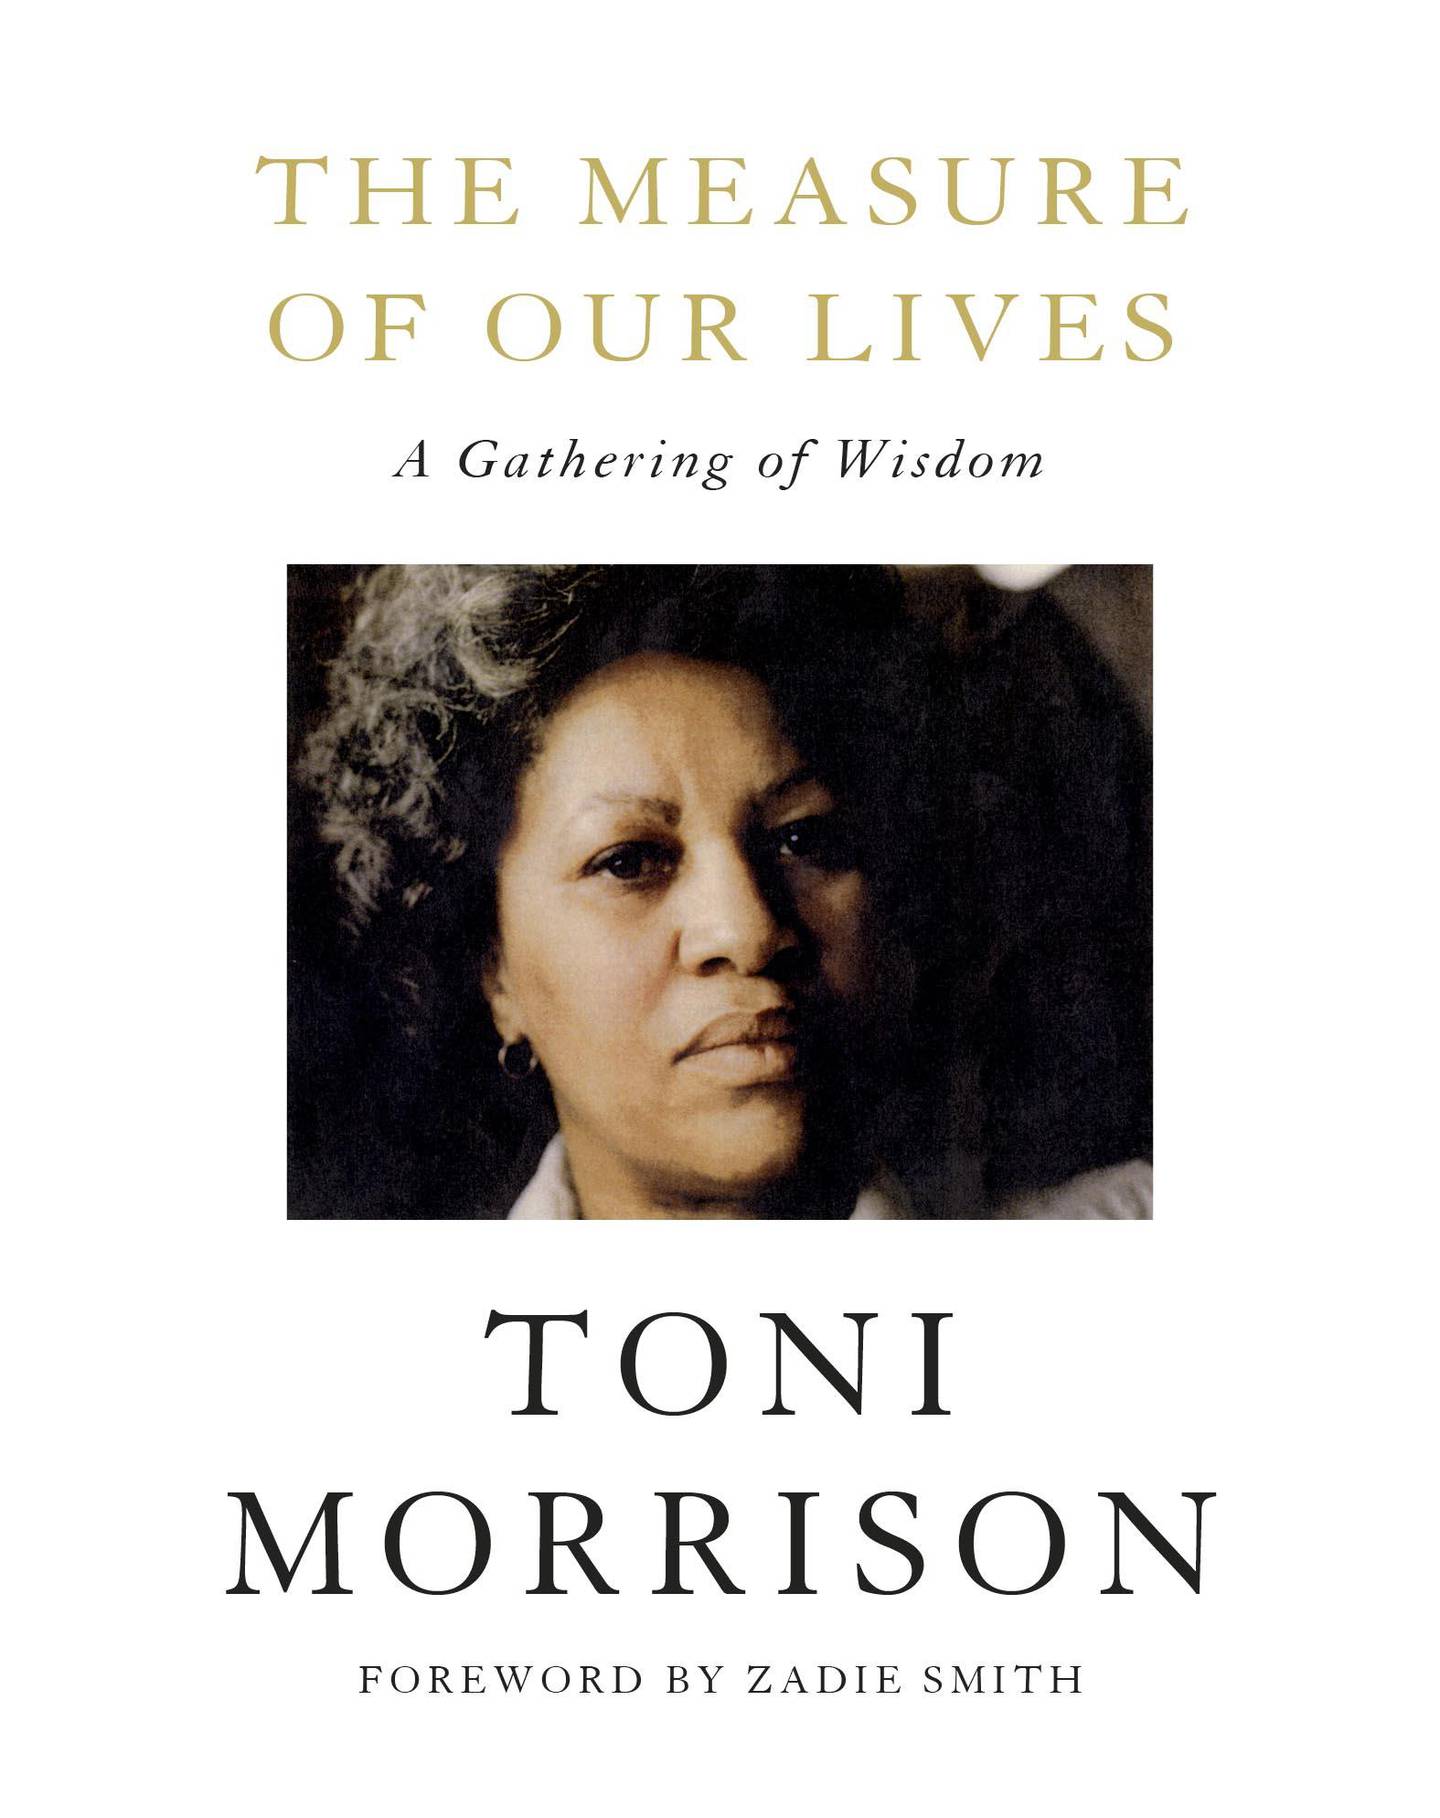 The Measure of Our Lives: A GATHERING OF WISDOM By TONI MORRISON, Foreword by Zadie Smith. Courtesy Penguin Random House